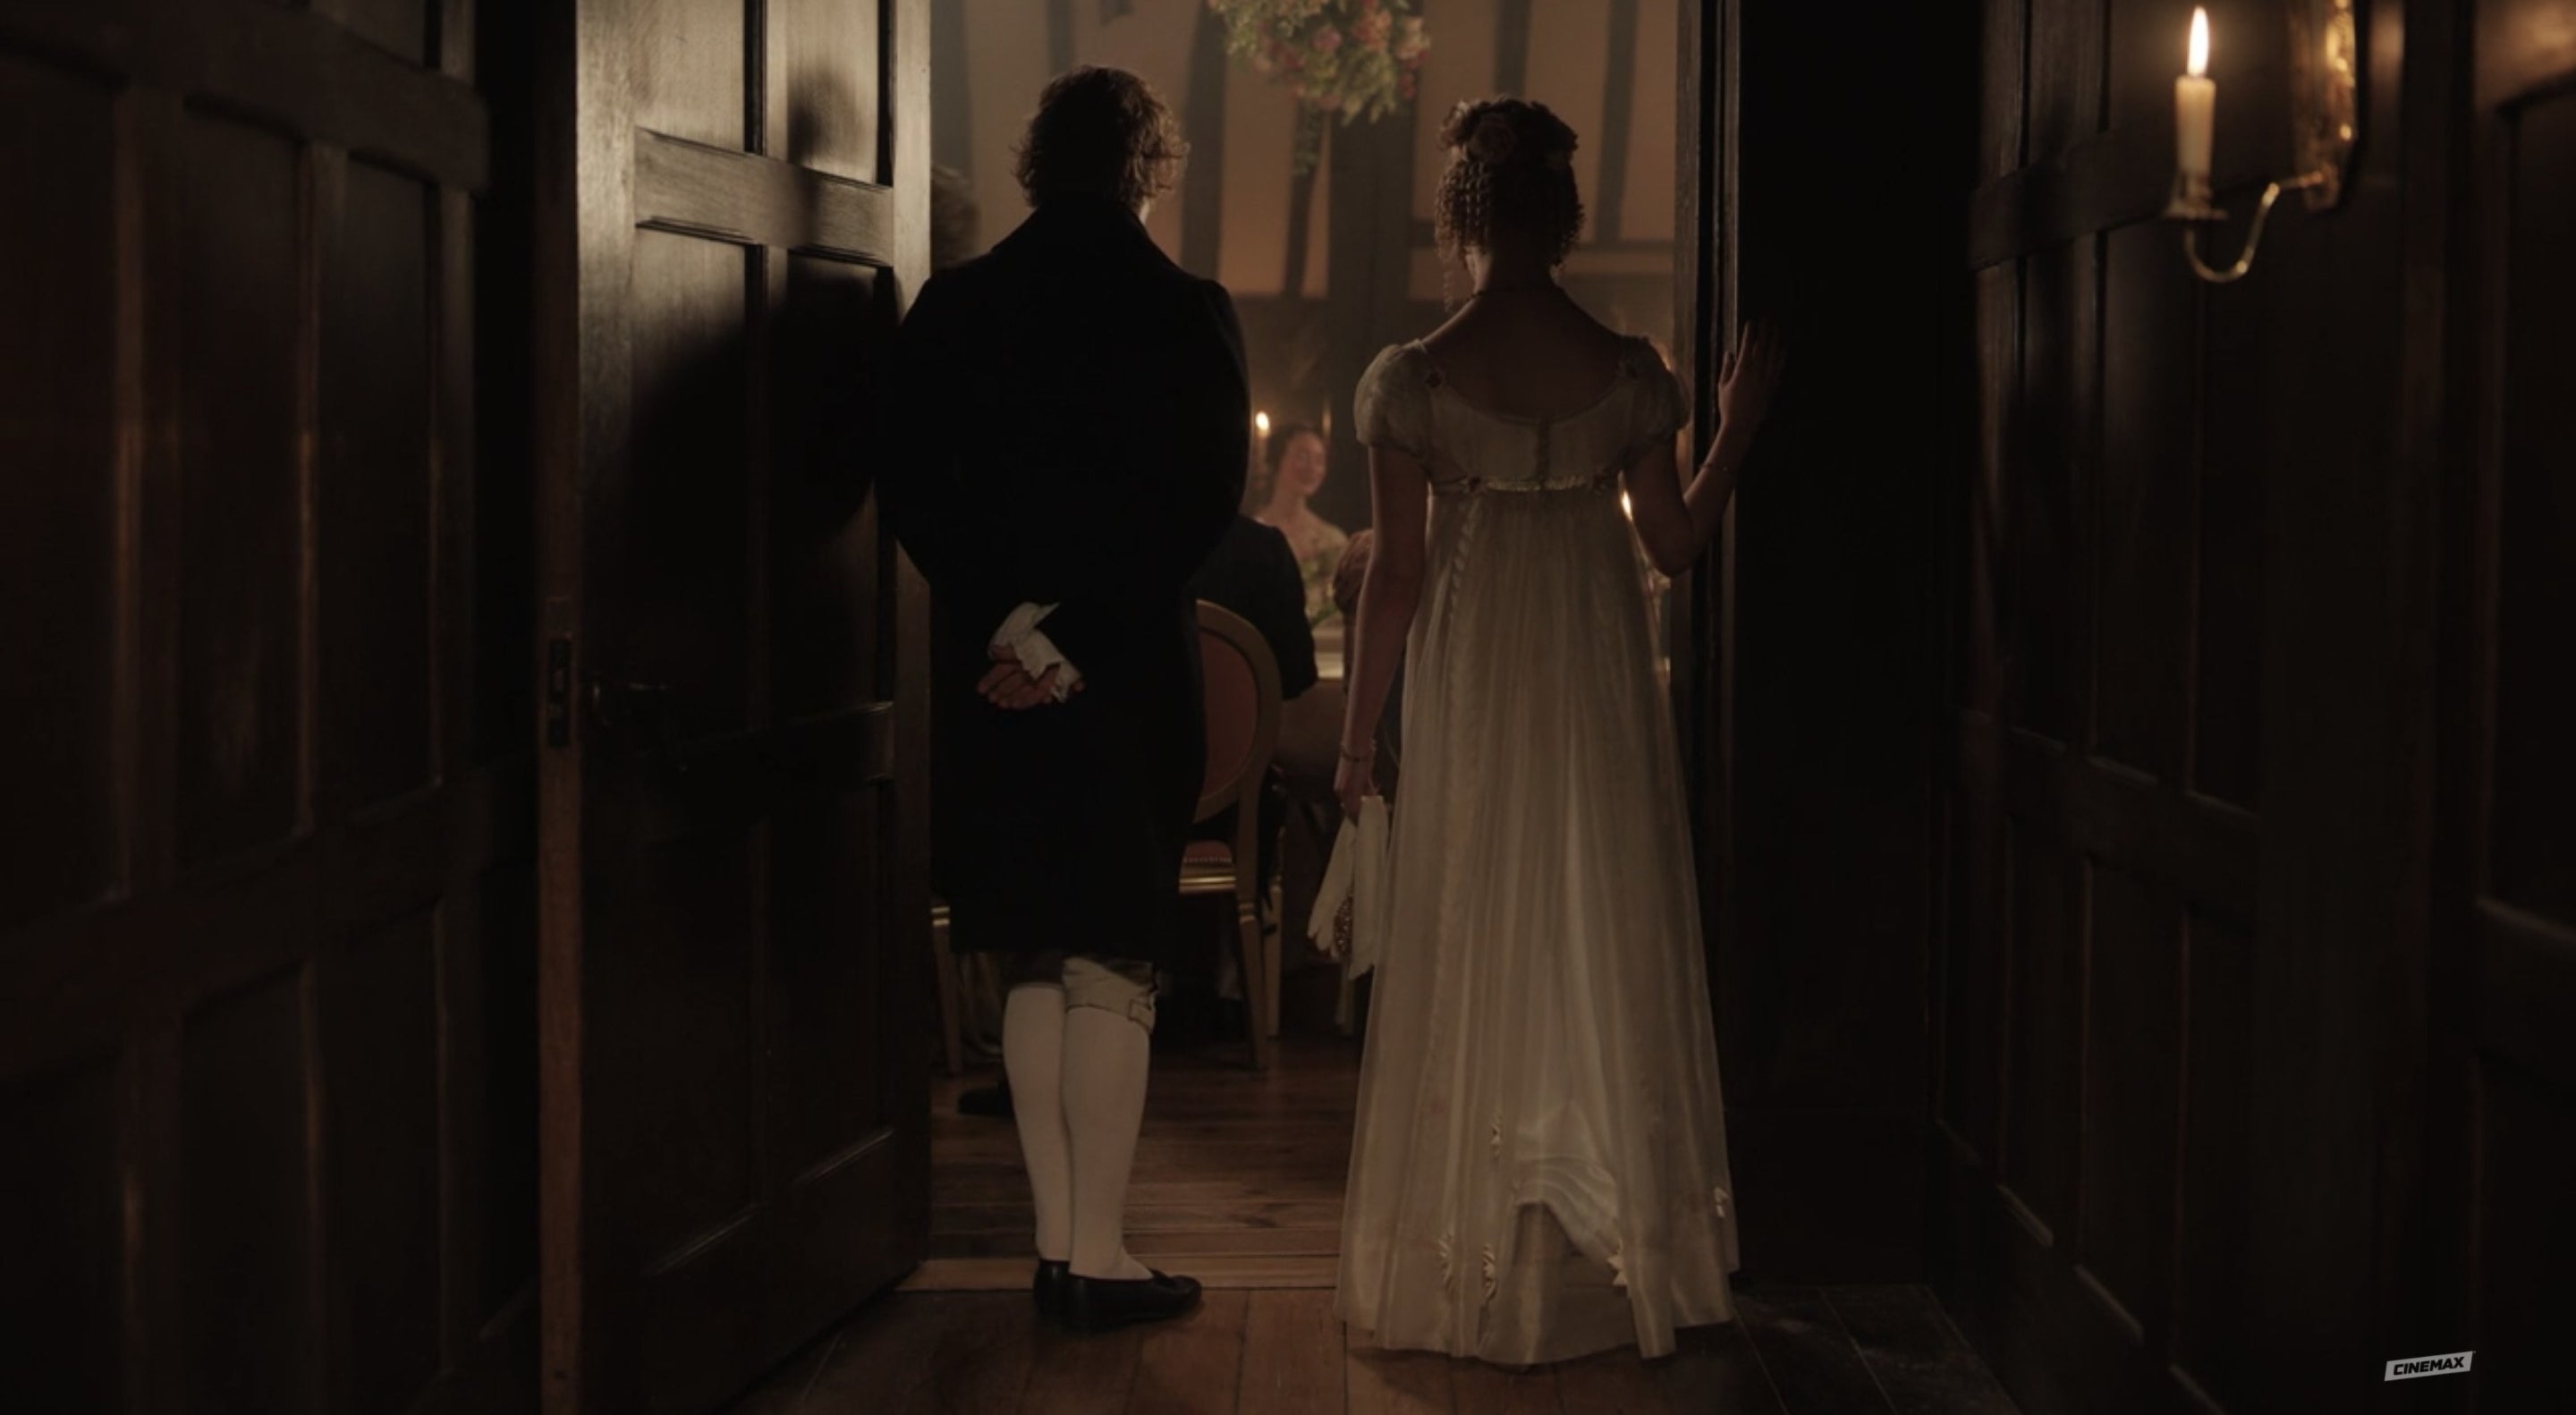 Knightley and Emma enter a room, we see them from behind